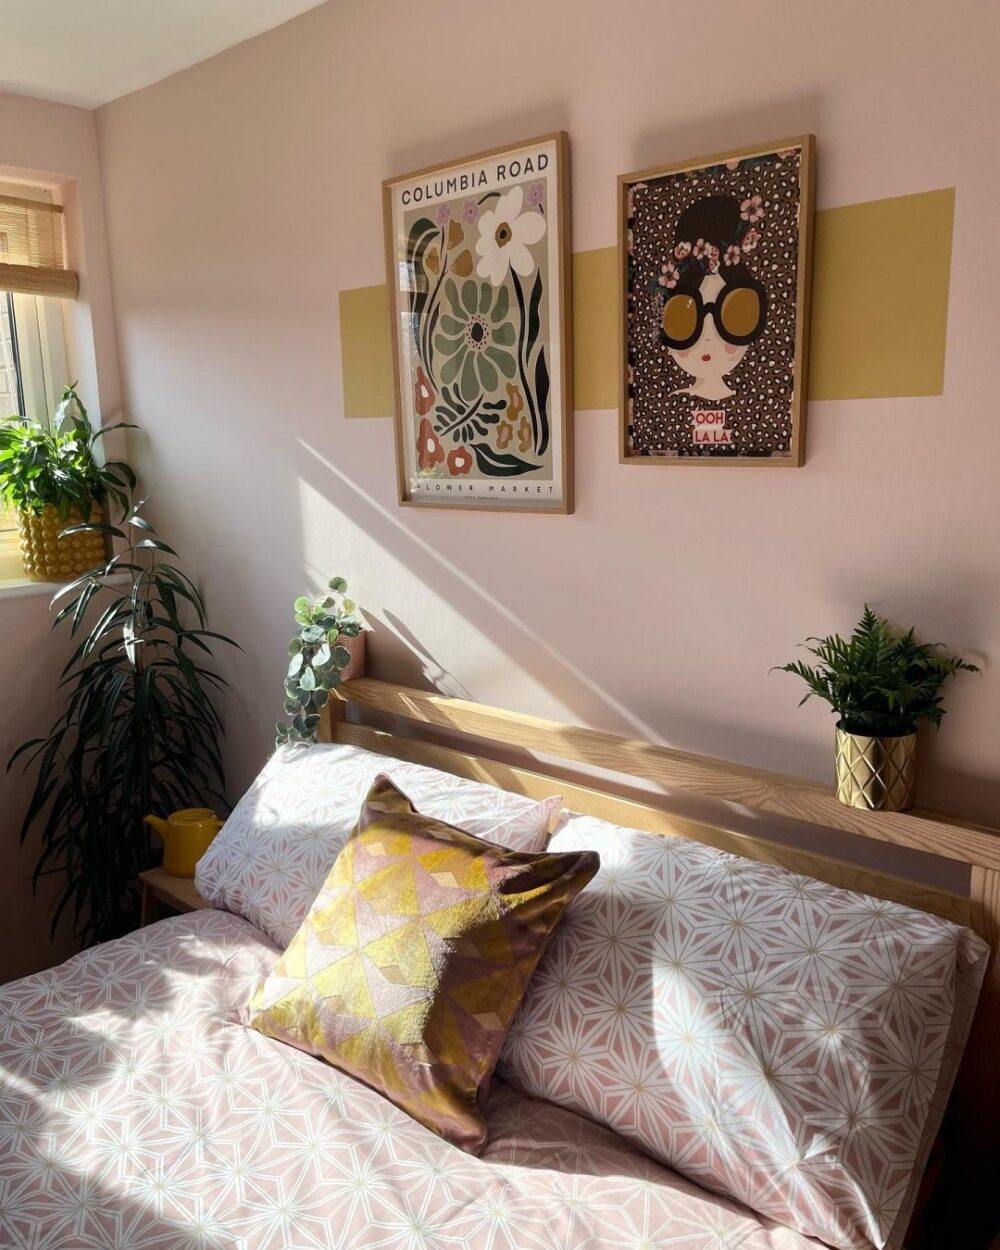 A pink and yellow bedroom, styled with pink, white and yellow bedding.